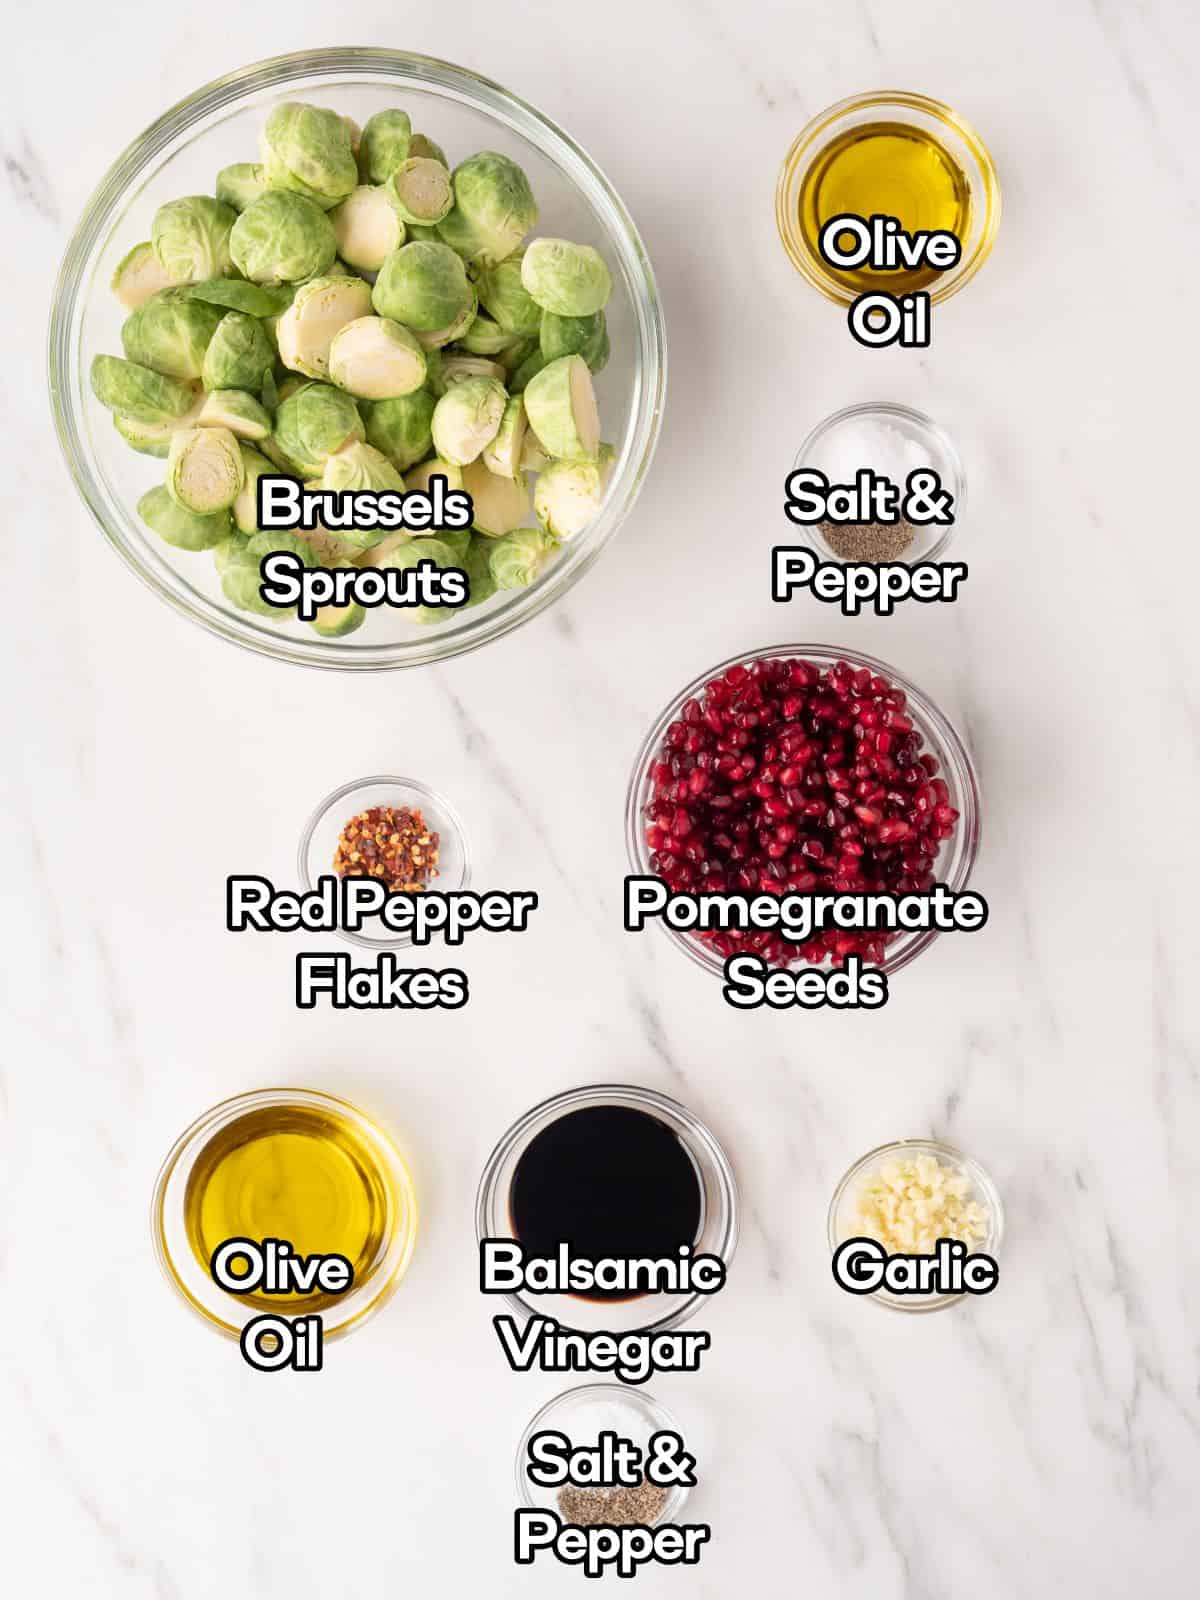 Mise-en-place of all the ingredients to make roasted brussels sprouts salad with pomegranate seeds.